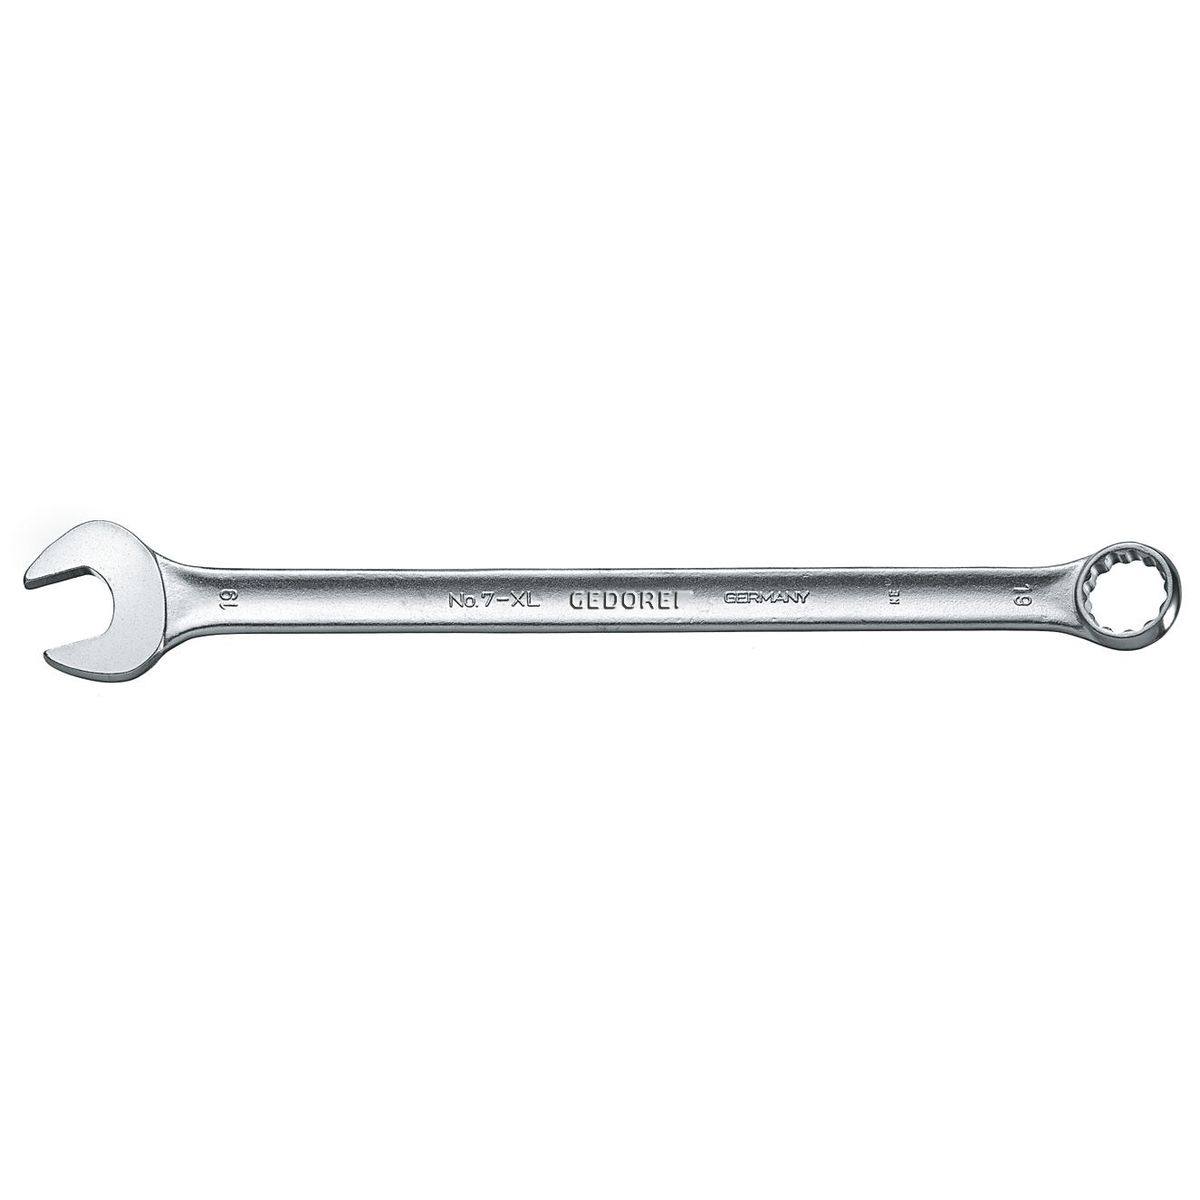 Combination spanner, extra long 13mm No.7 XL 13 Gedore